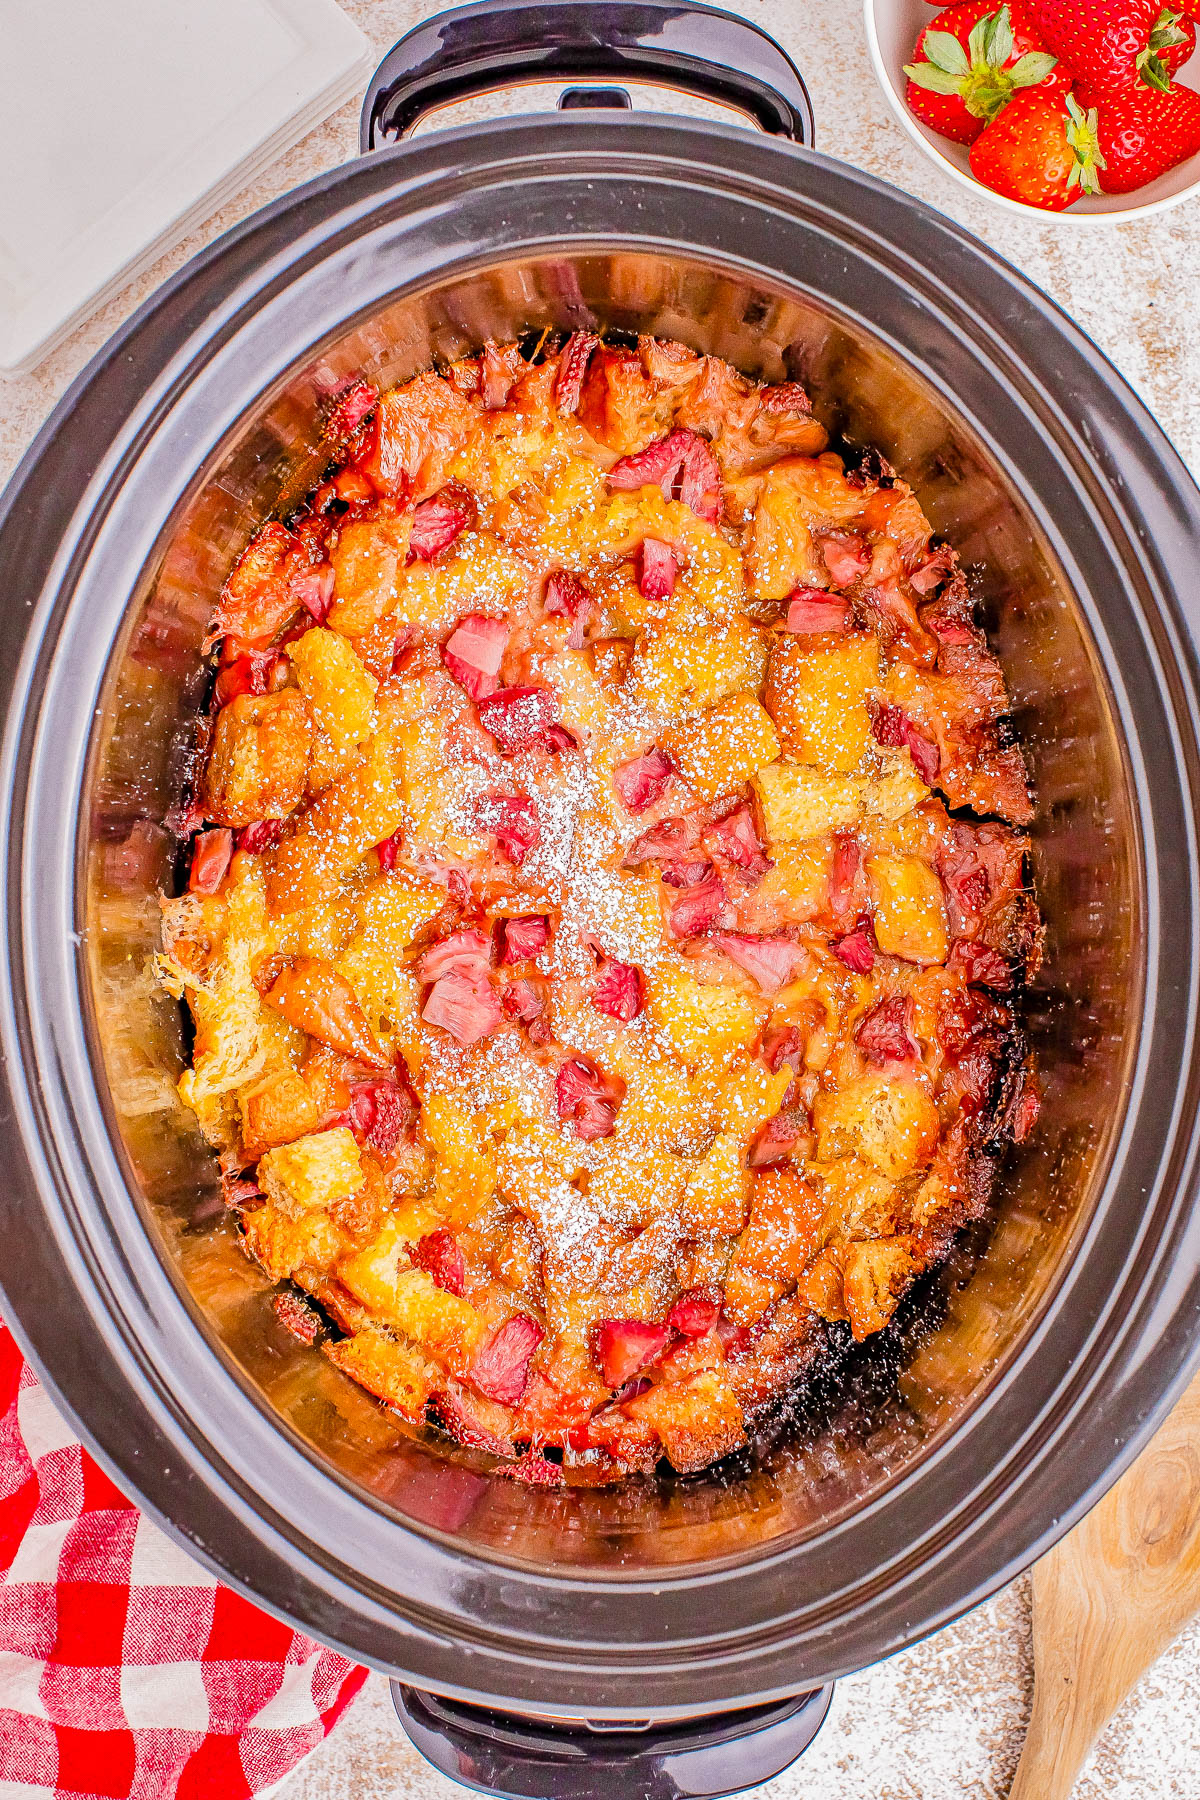 A cooked dish in a slow cooker, consisting of diced bread, chopped bacon, and melted cheese. A bowl of strawberries and a red checkered cloth are nearby.